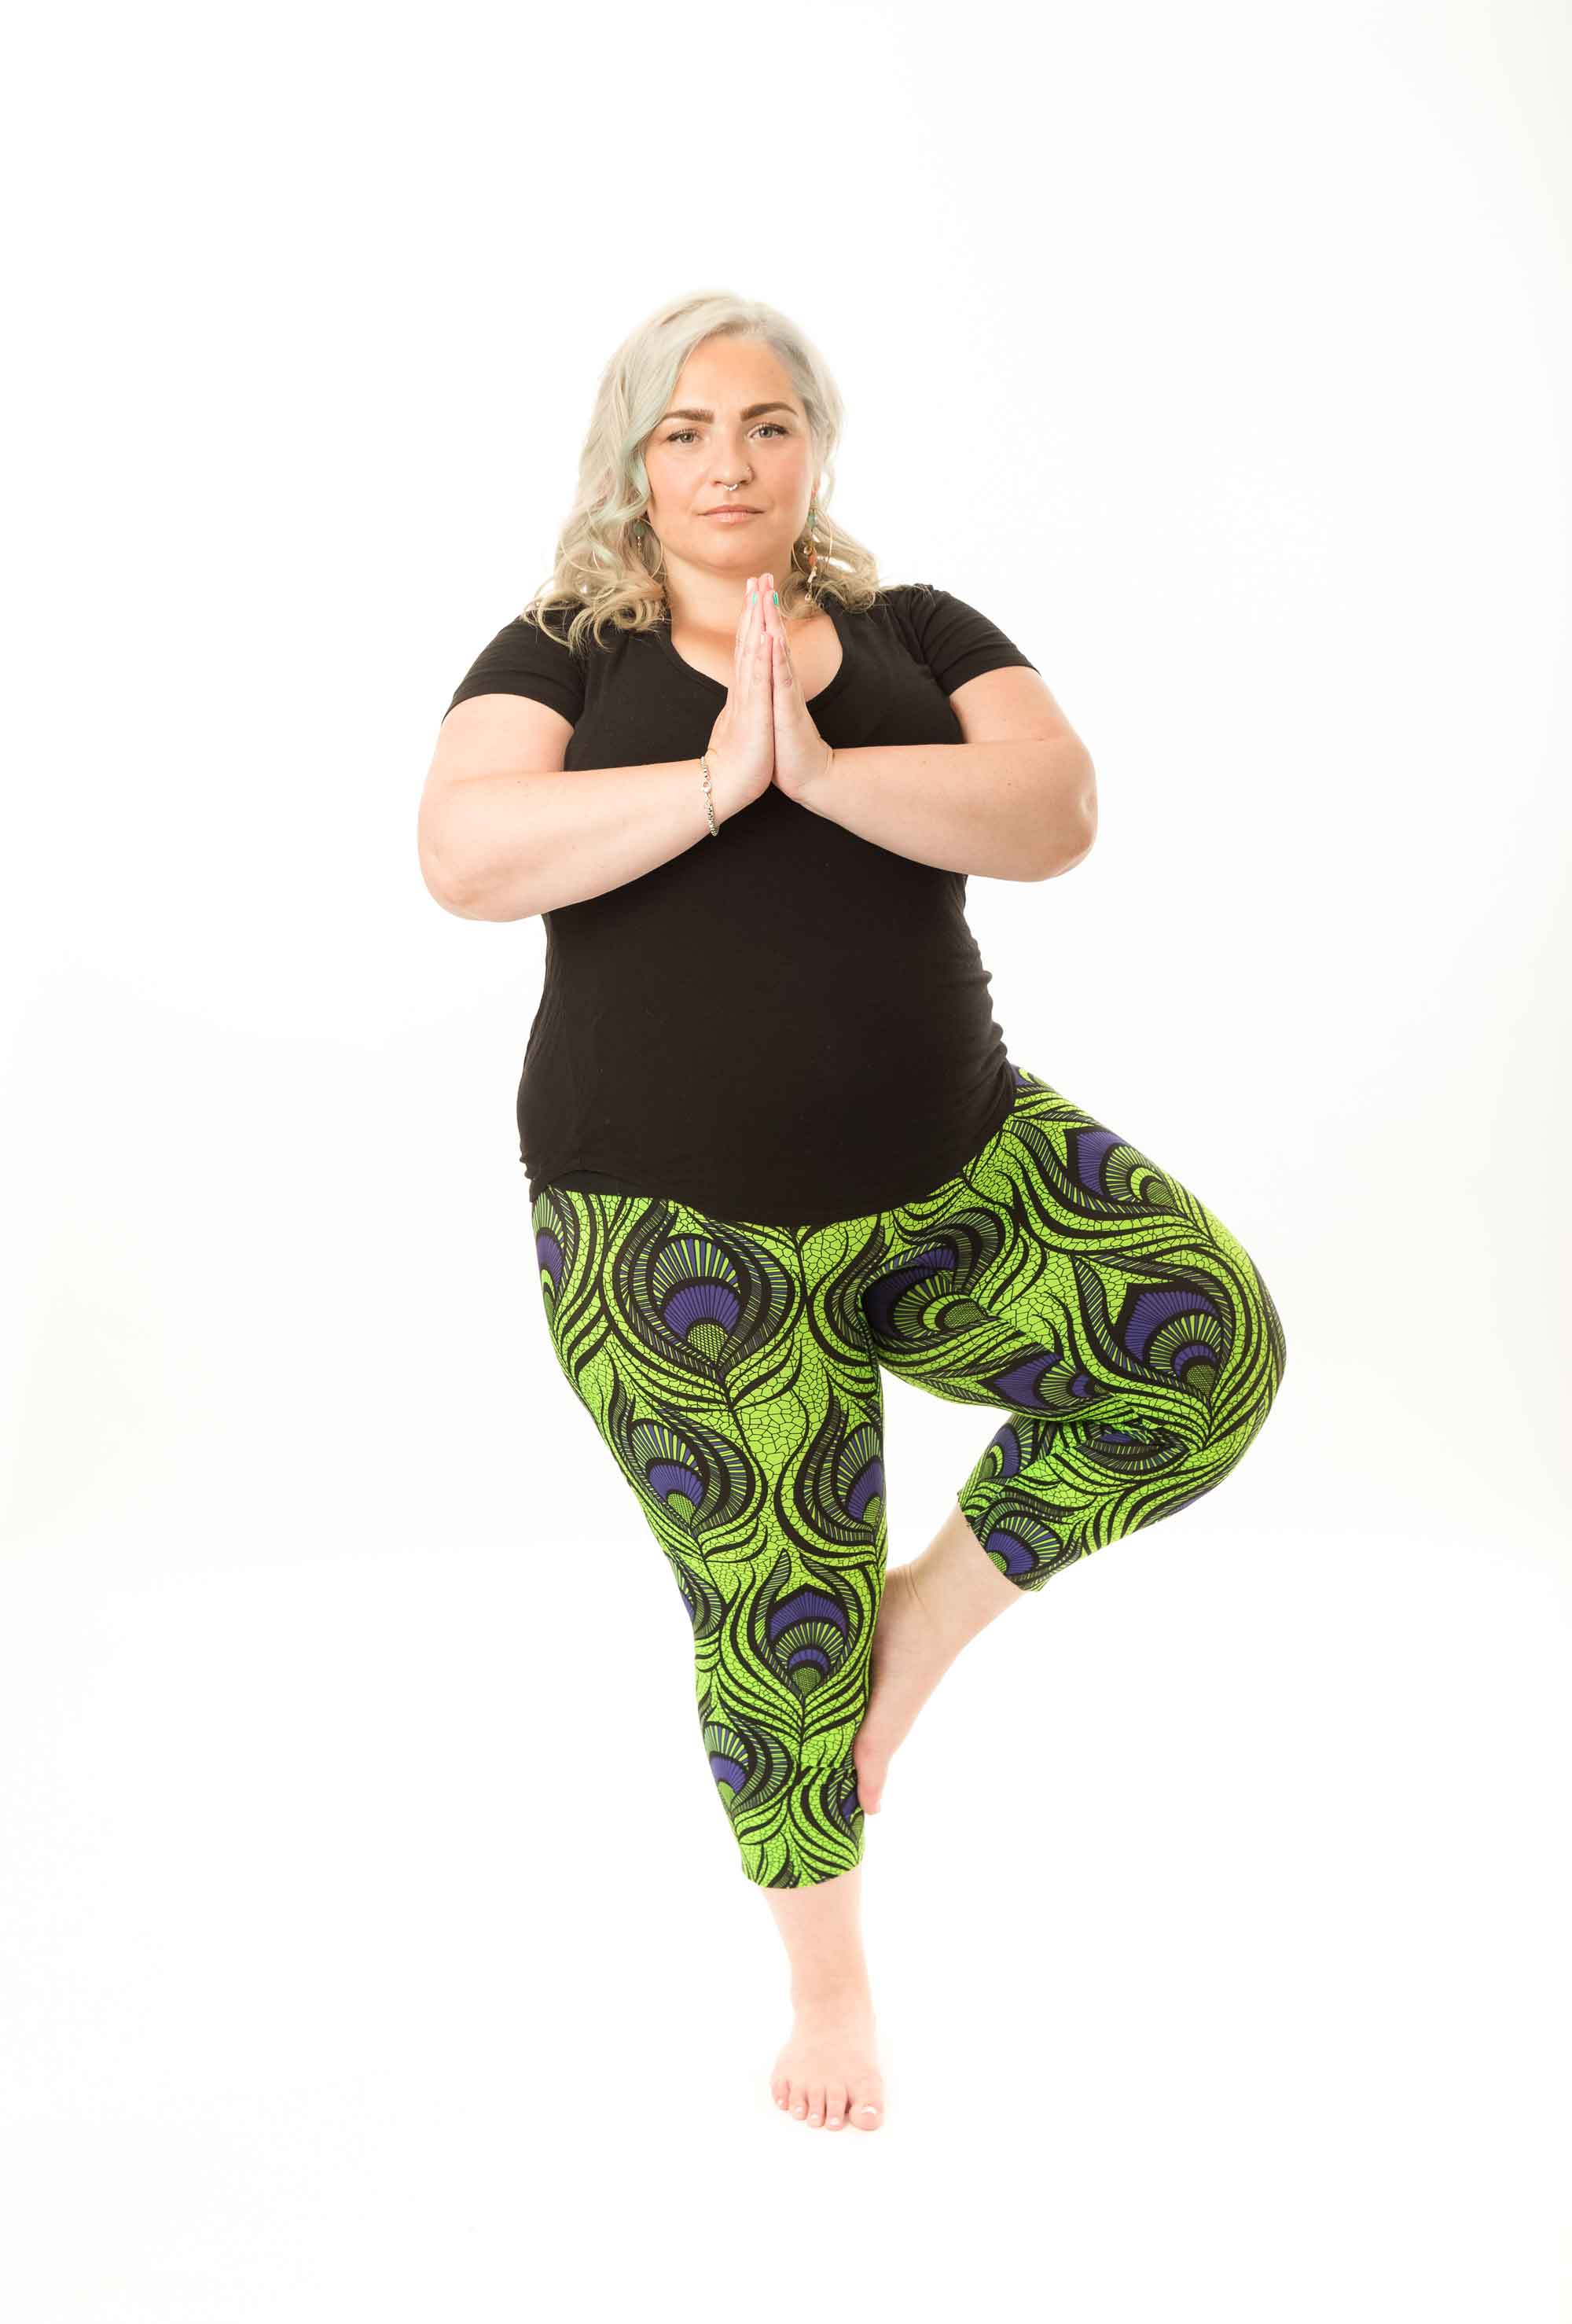 Jessamyn Stanley Is Changing The Yoga World, One Pose At A Time | SELF